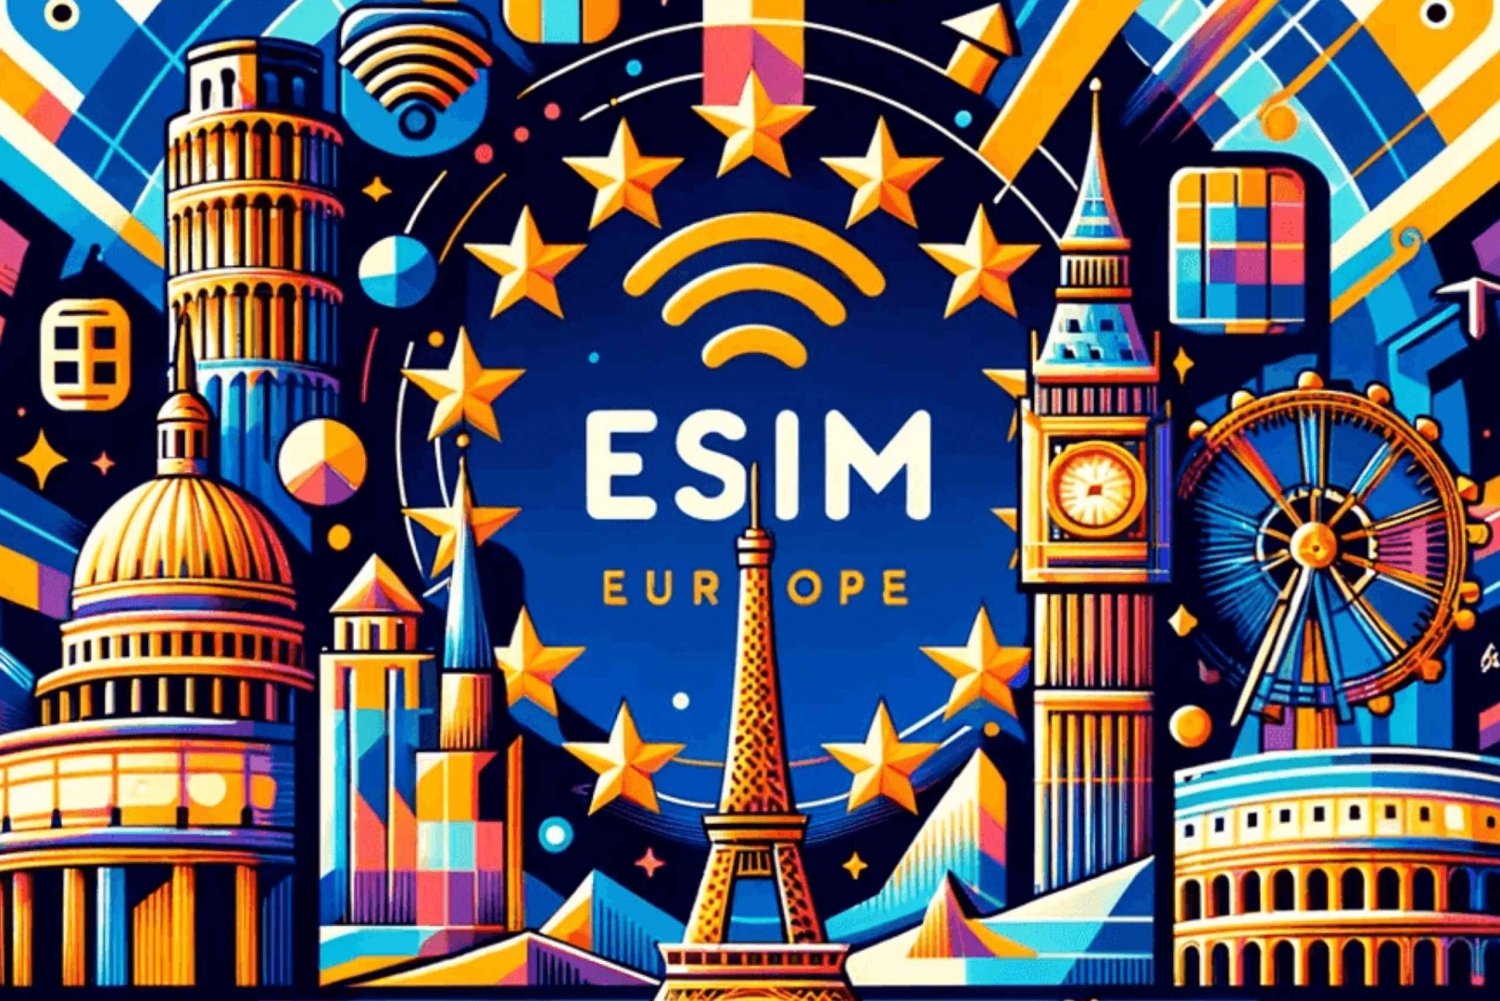 Europe: e-SIM with Unlimited Data